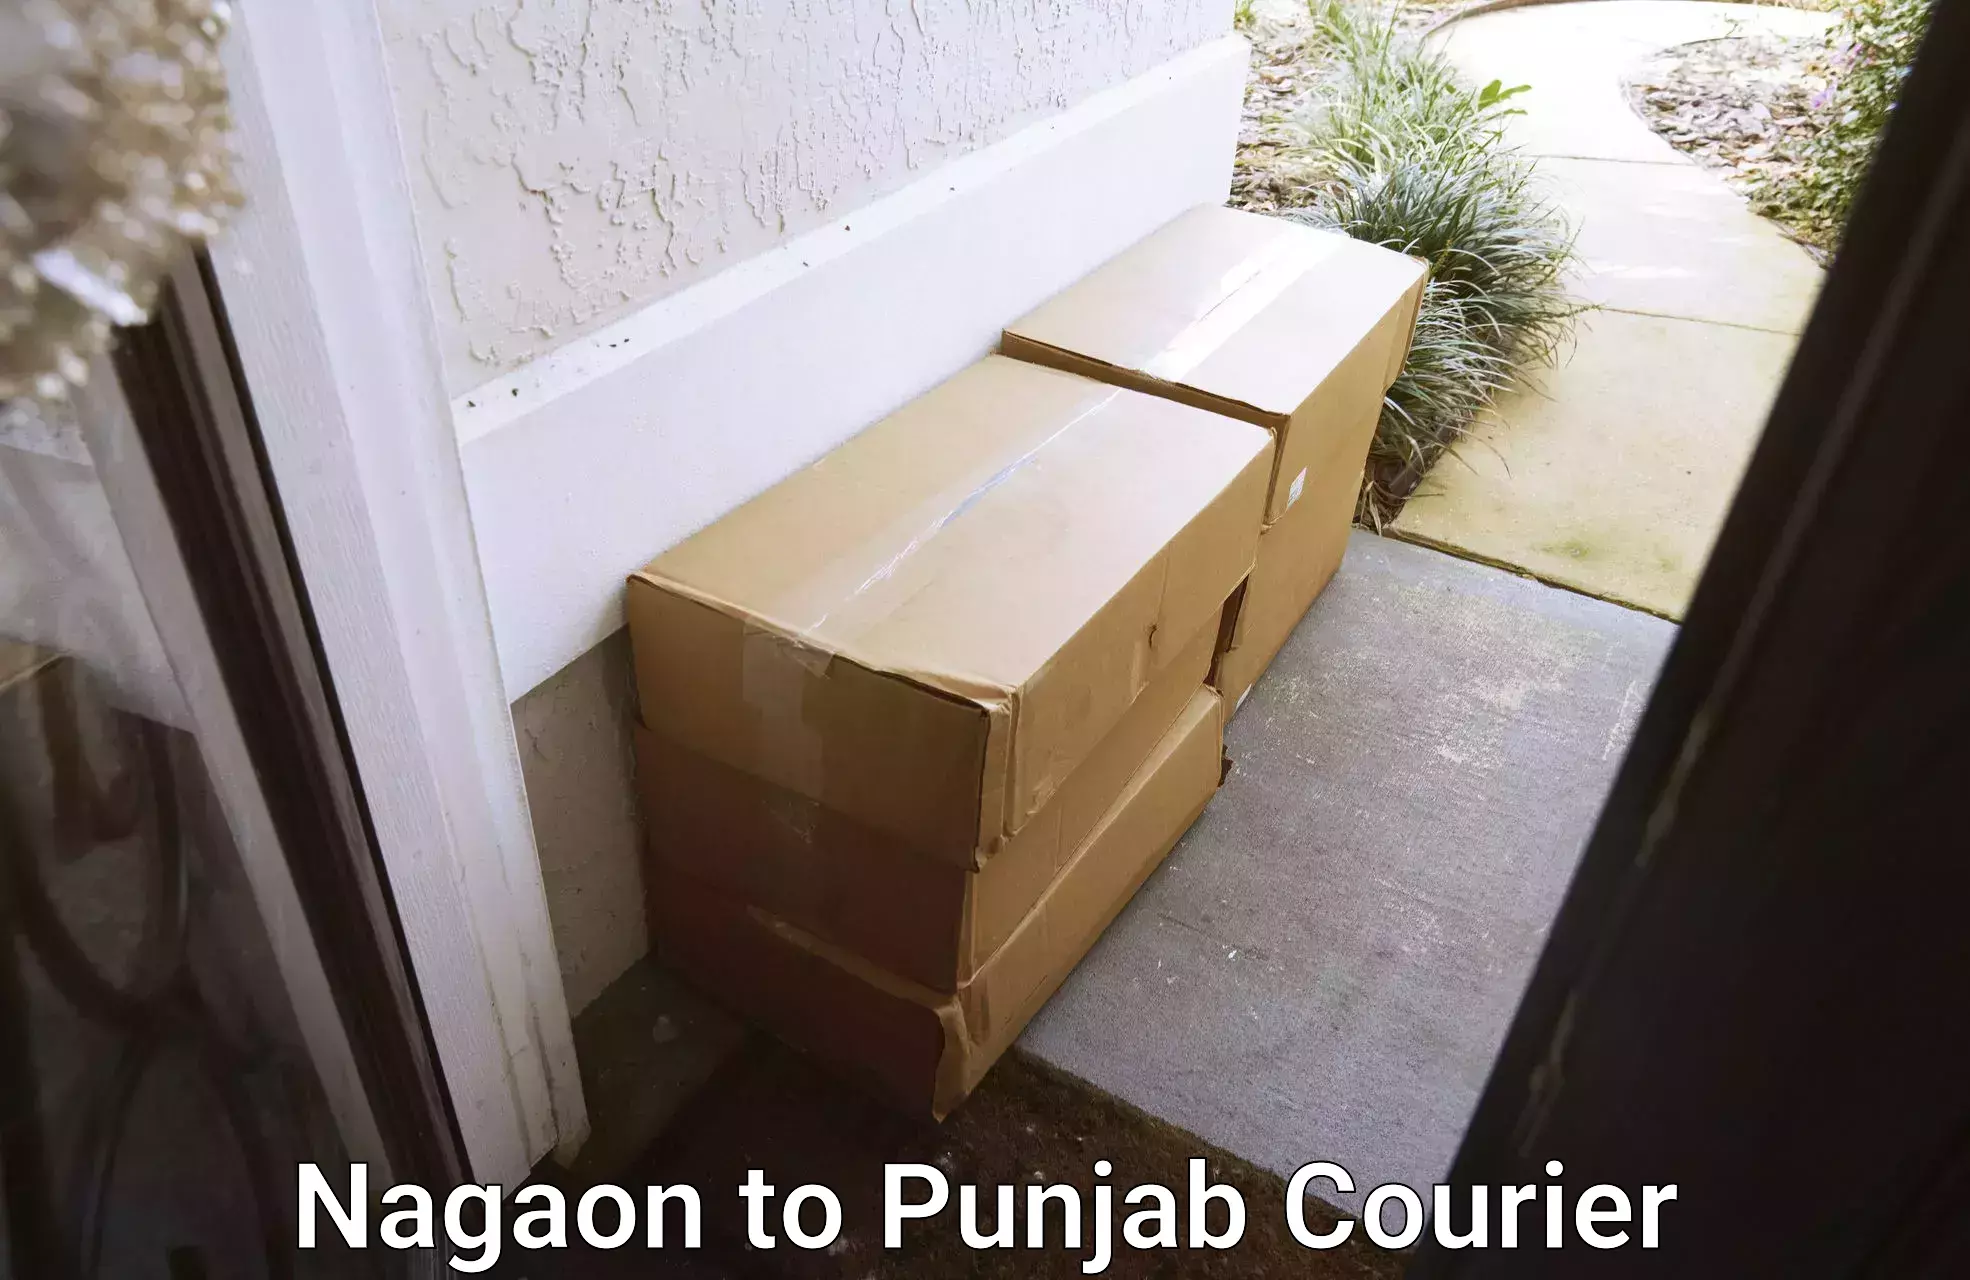 Personalized courier experiences Nagaon to Dinanagar